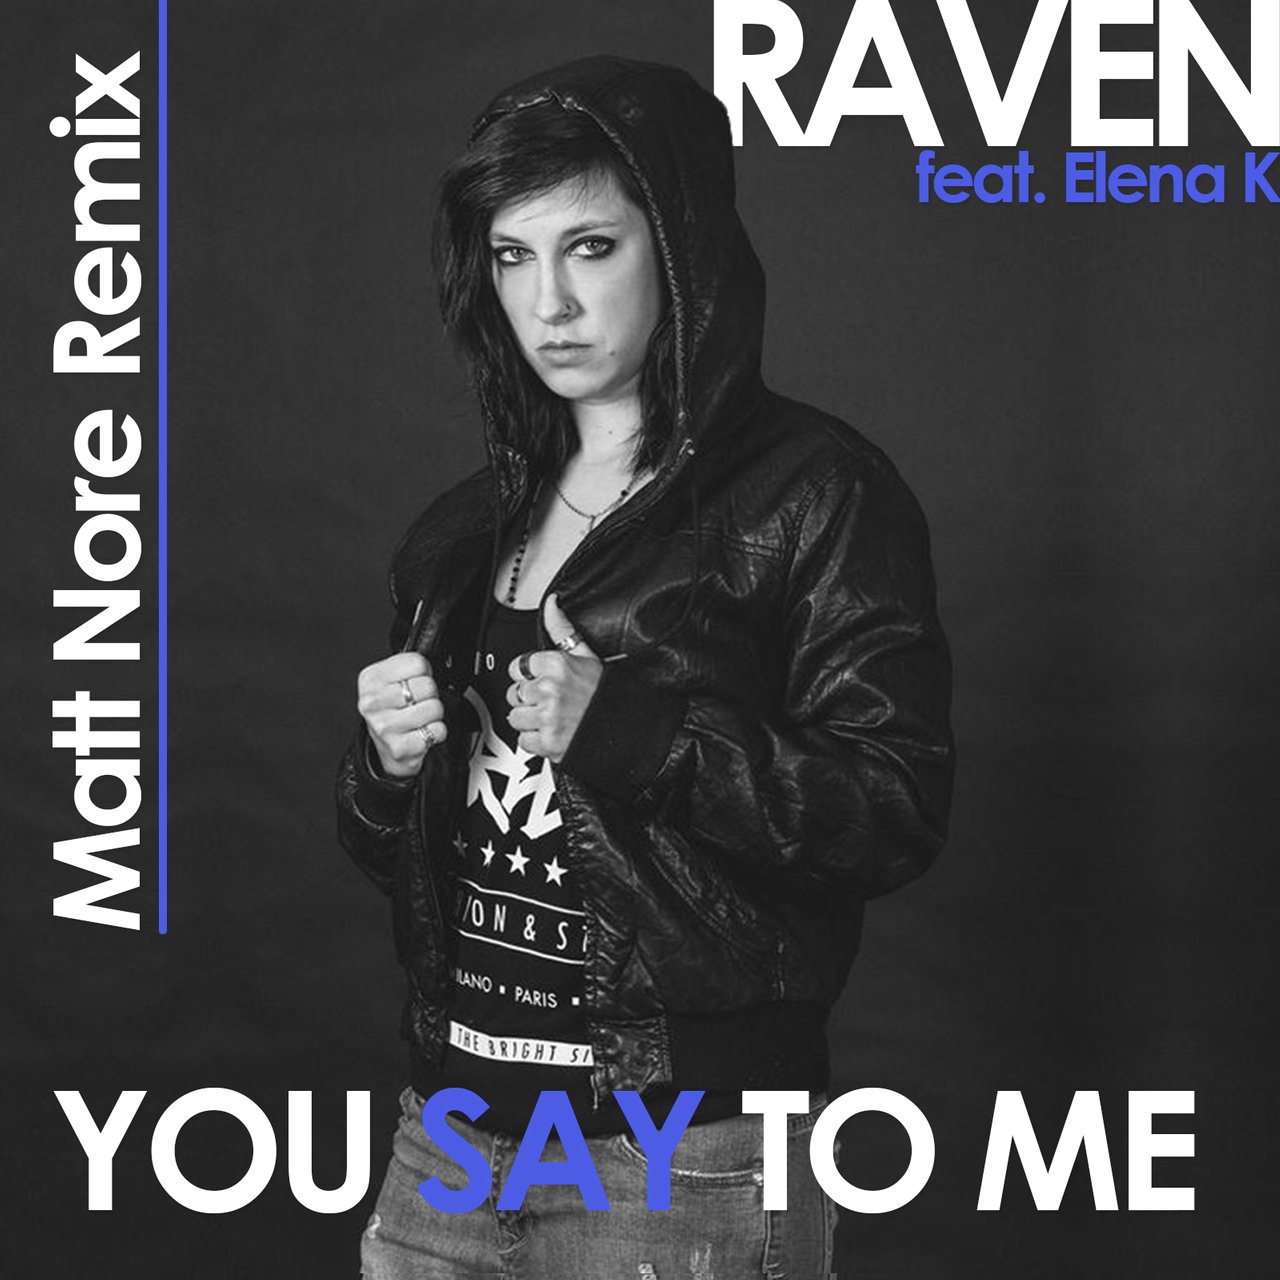 Second Remix of my First Song: Raven feat. Elena K - You Say To Me (Matt Nore Remix)